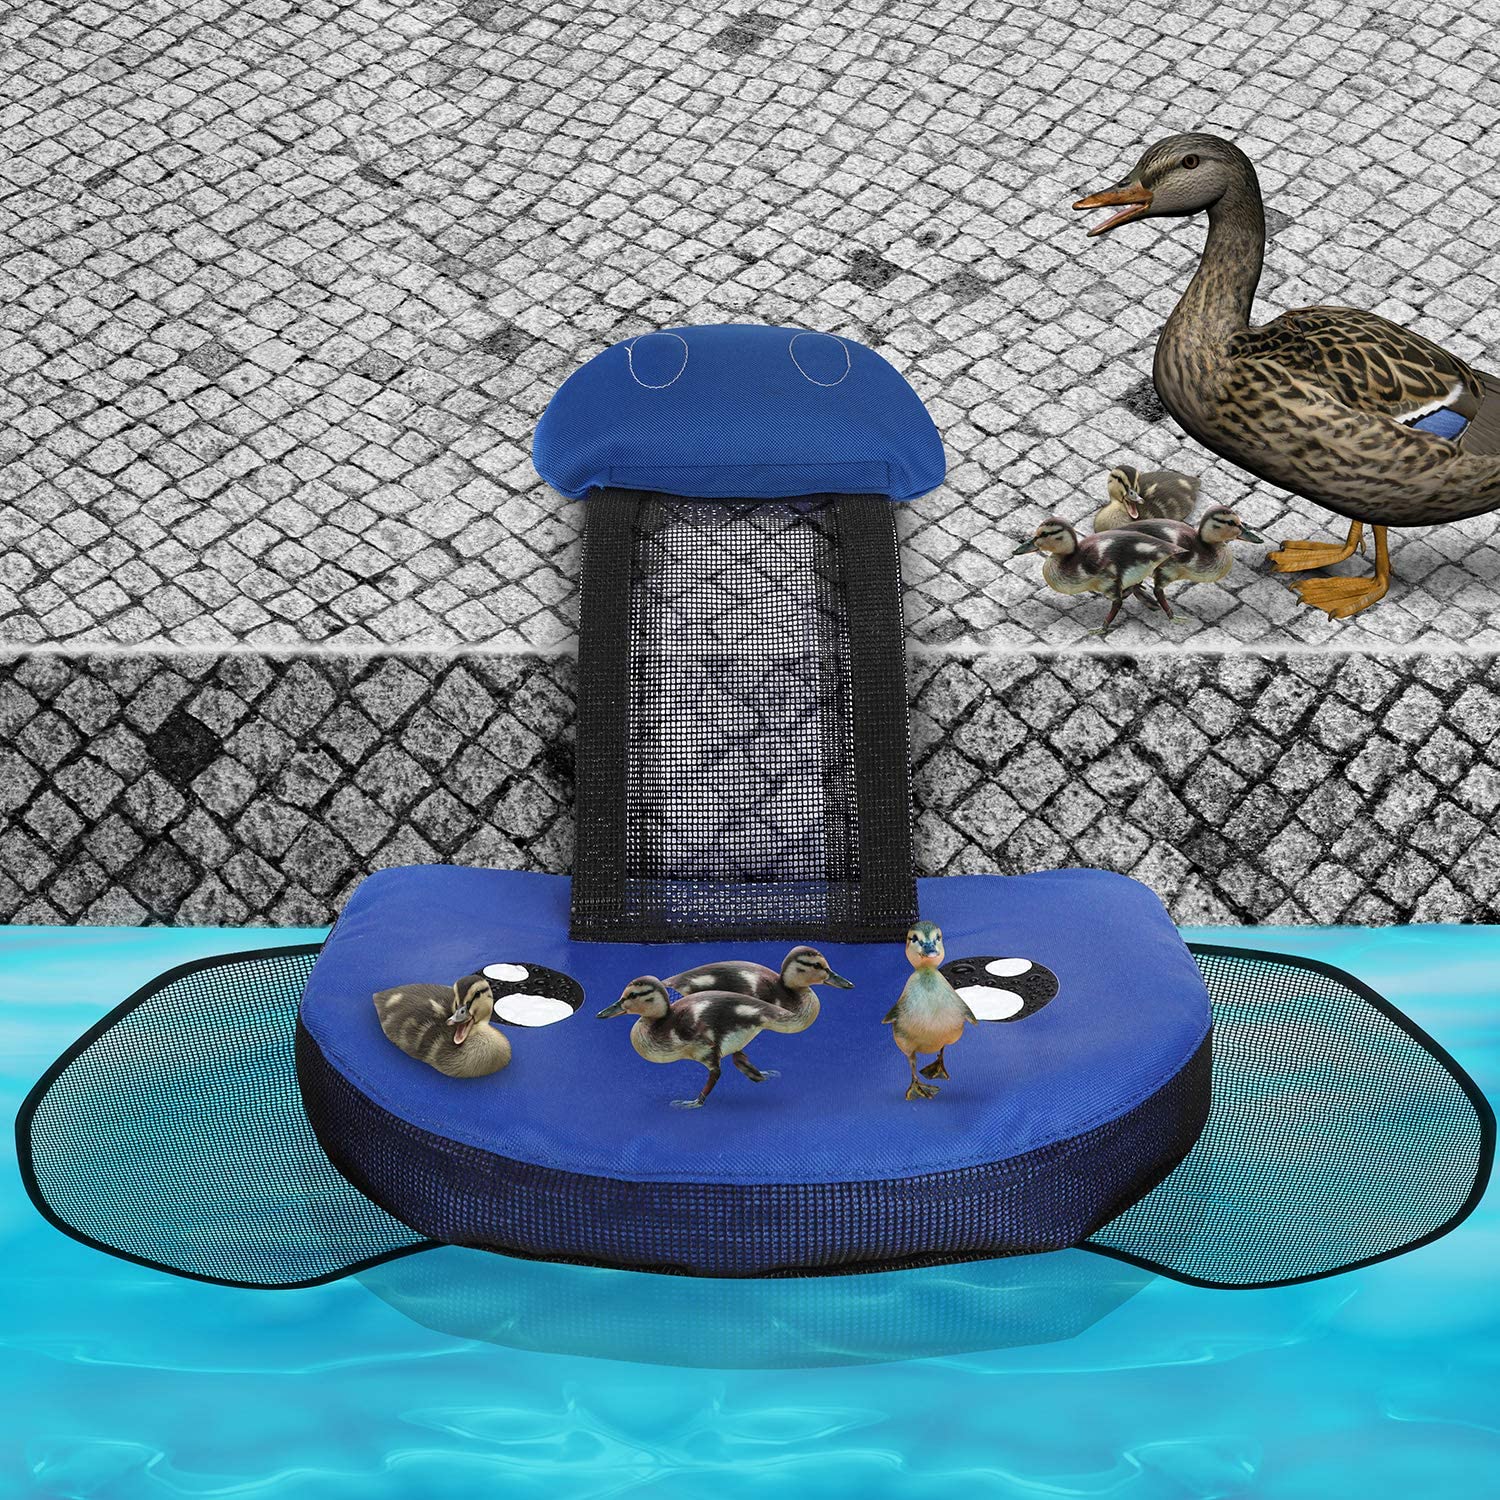 Elephant Shaped Pool Ramp Helps Frogs, Mice, and Other Critters Out Of Your Pool - Critter exit pool ramp